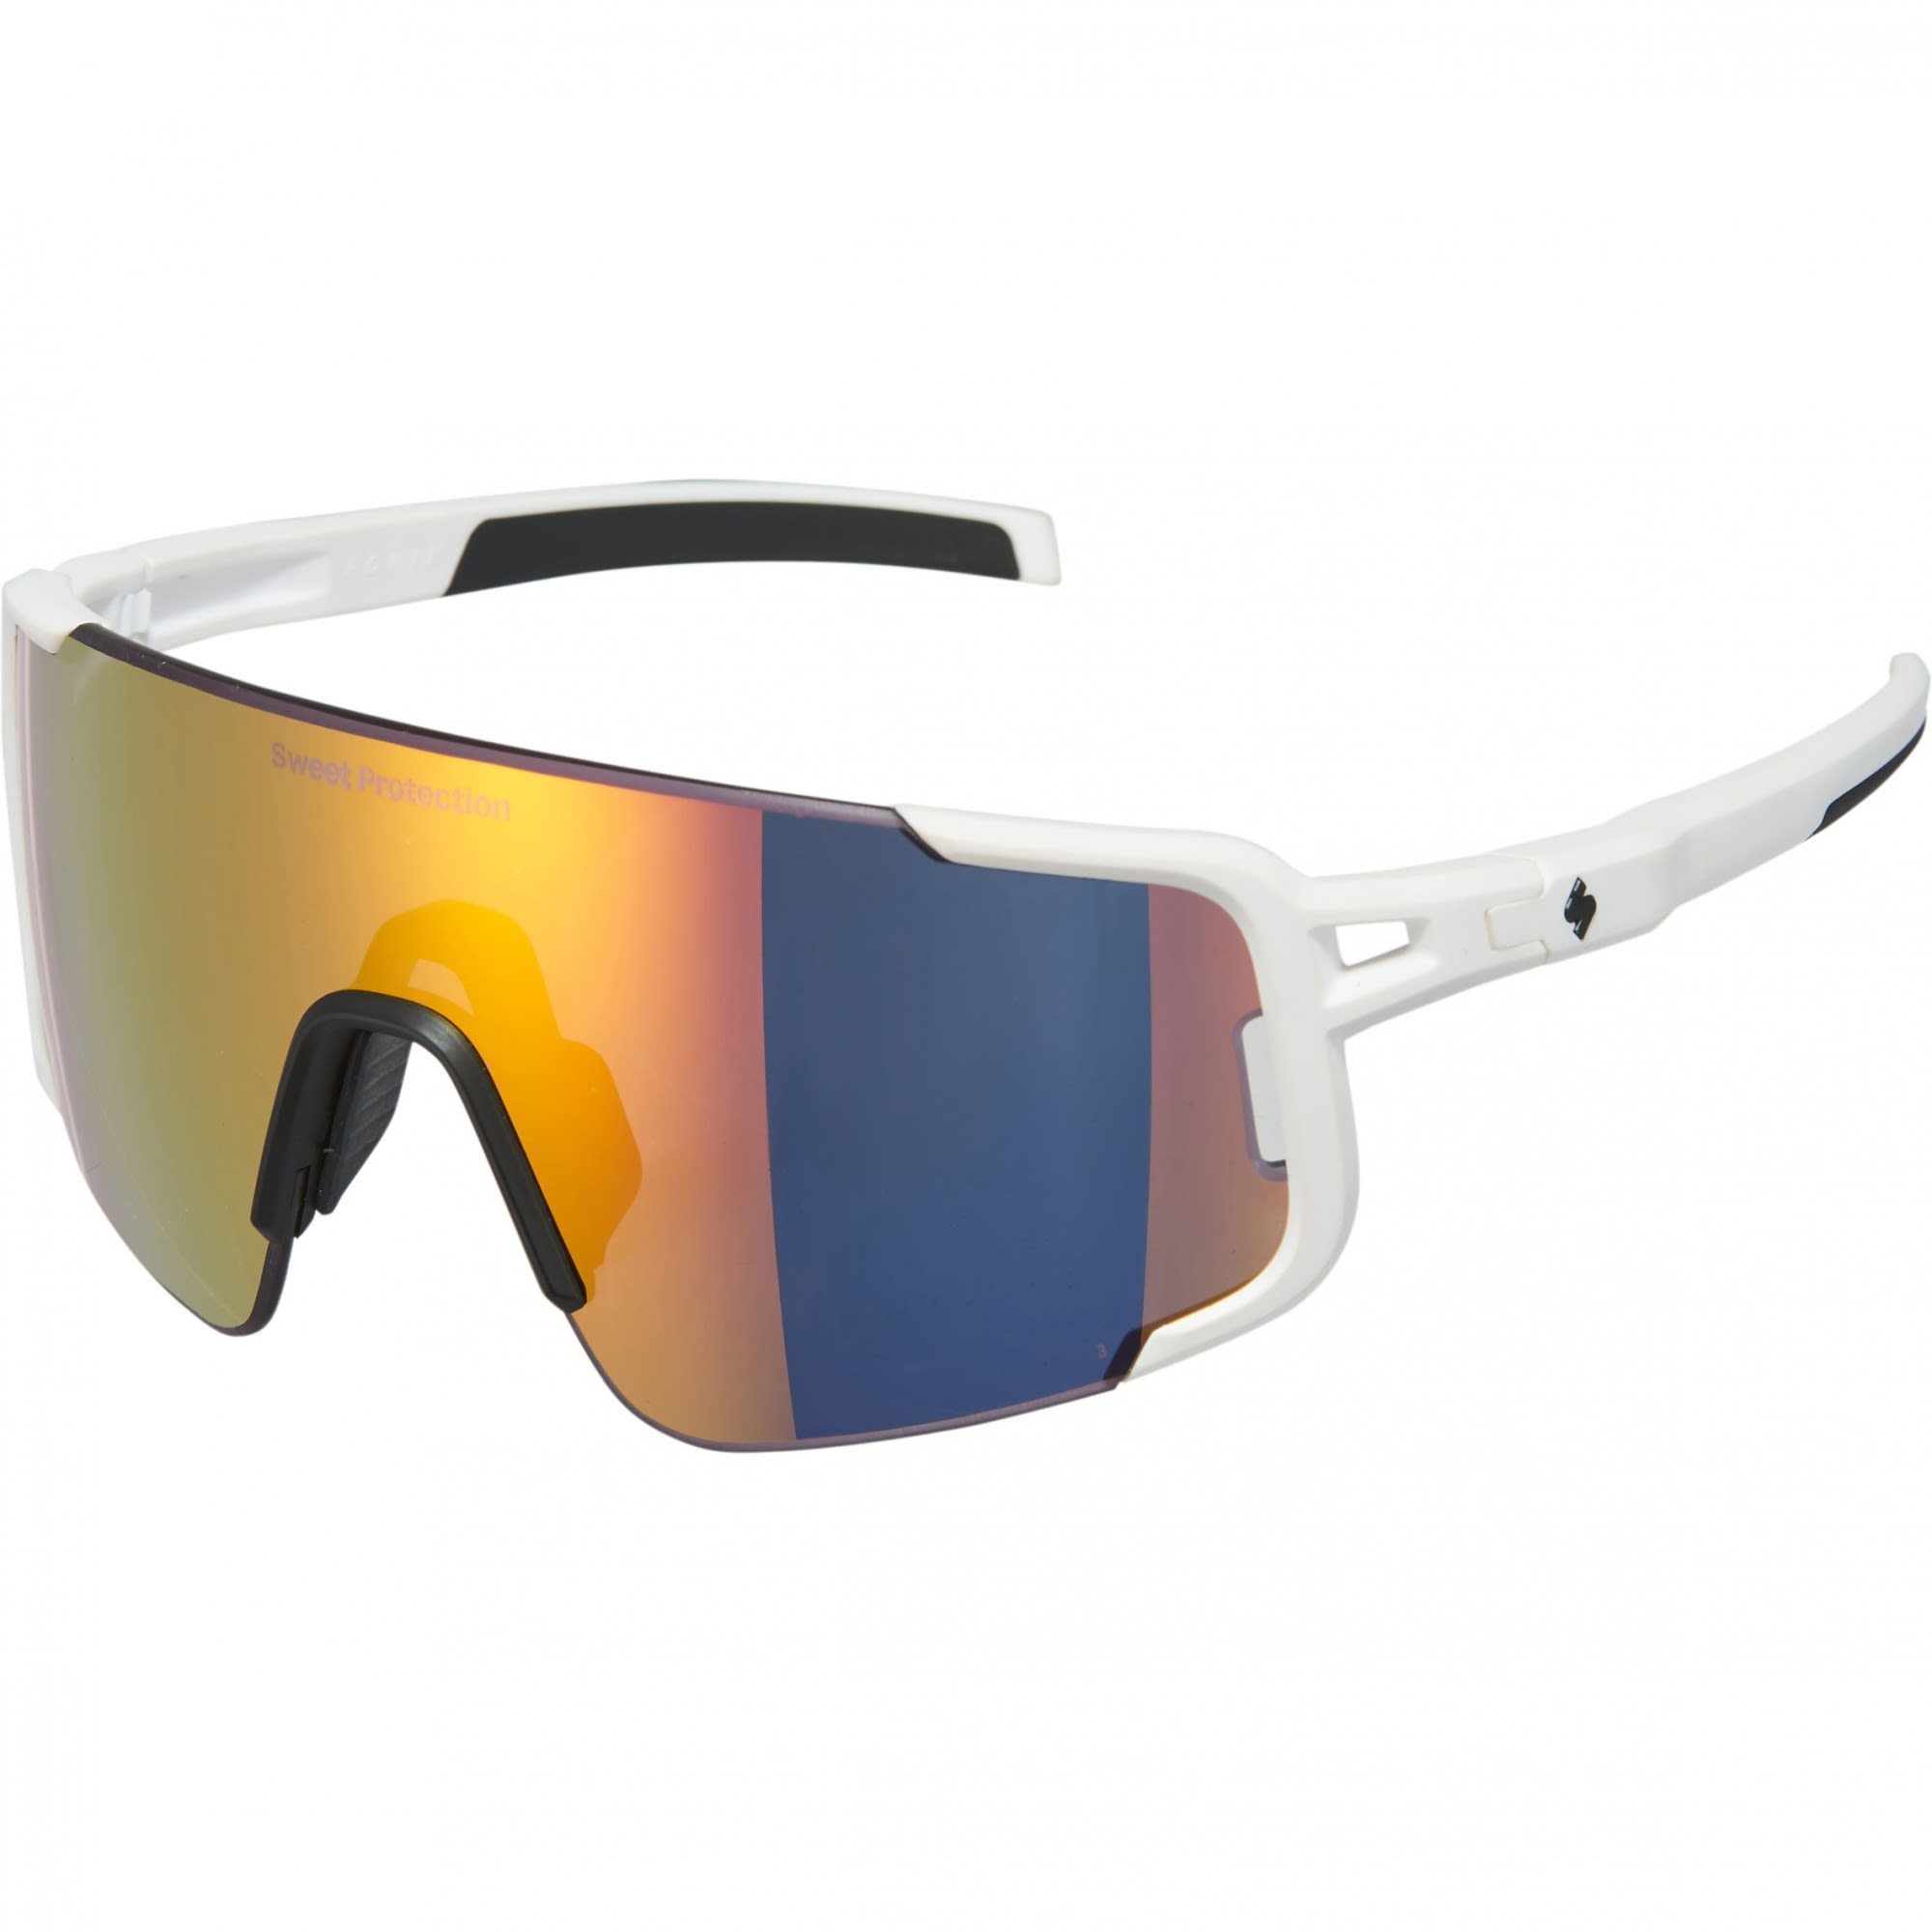 Sweet Protection Fahrradbrille Protection White Accessoires - Topaz Rig Sweet RIG Matte Ronin Reflect